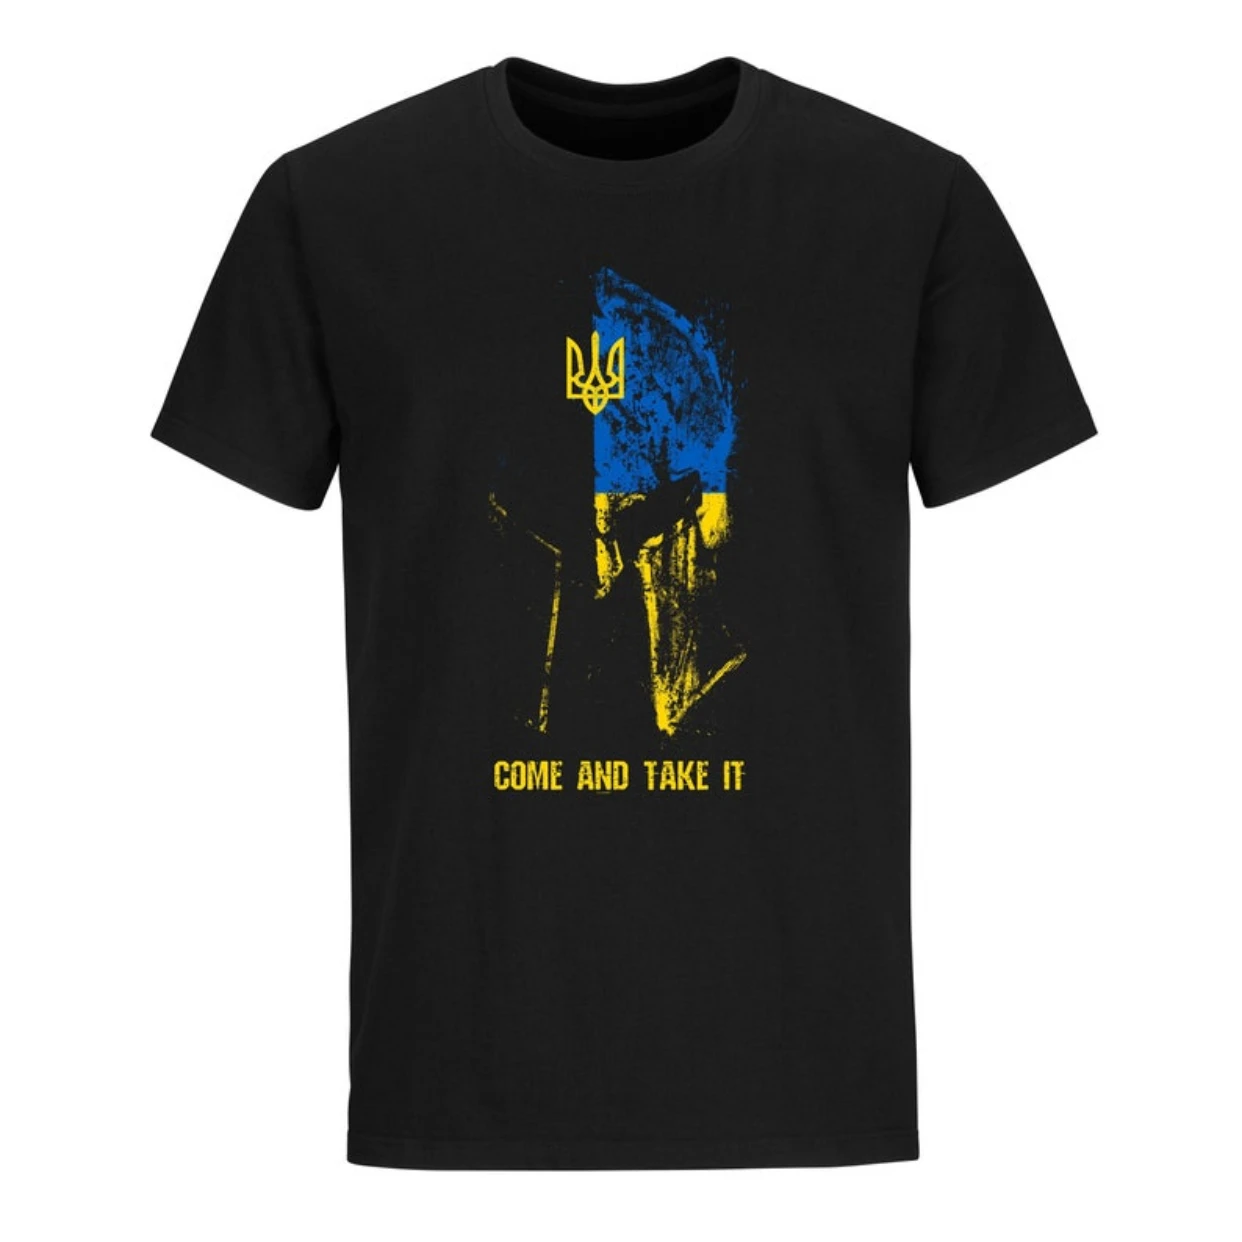 

Come and Take It. Ukraine trident Flag Spartan Helmet T Shirt. Short Sleeve 100% Cotton Casual T-shirts Loose Top Size S-3XL